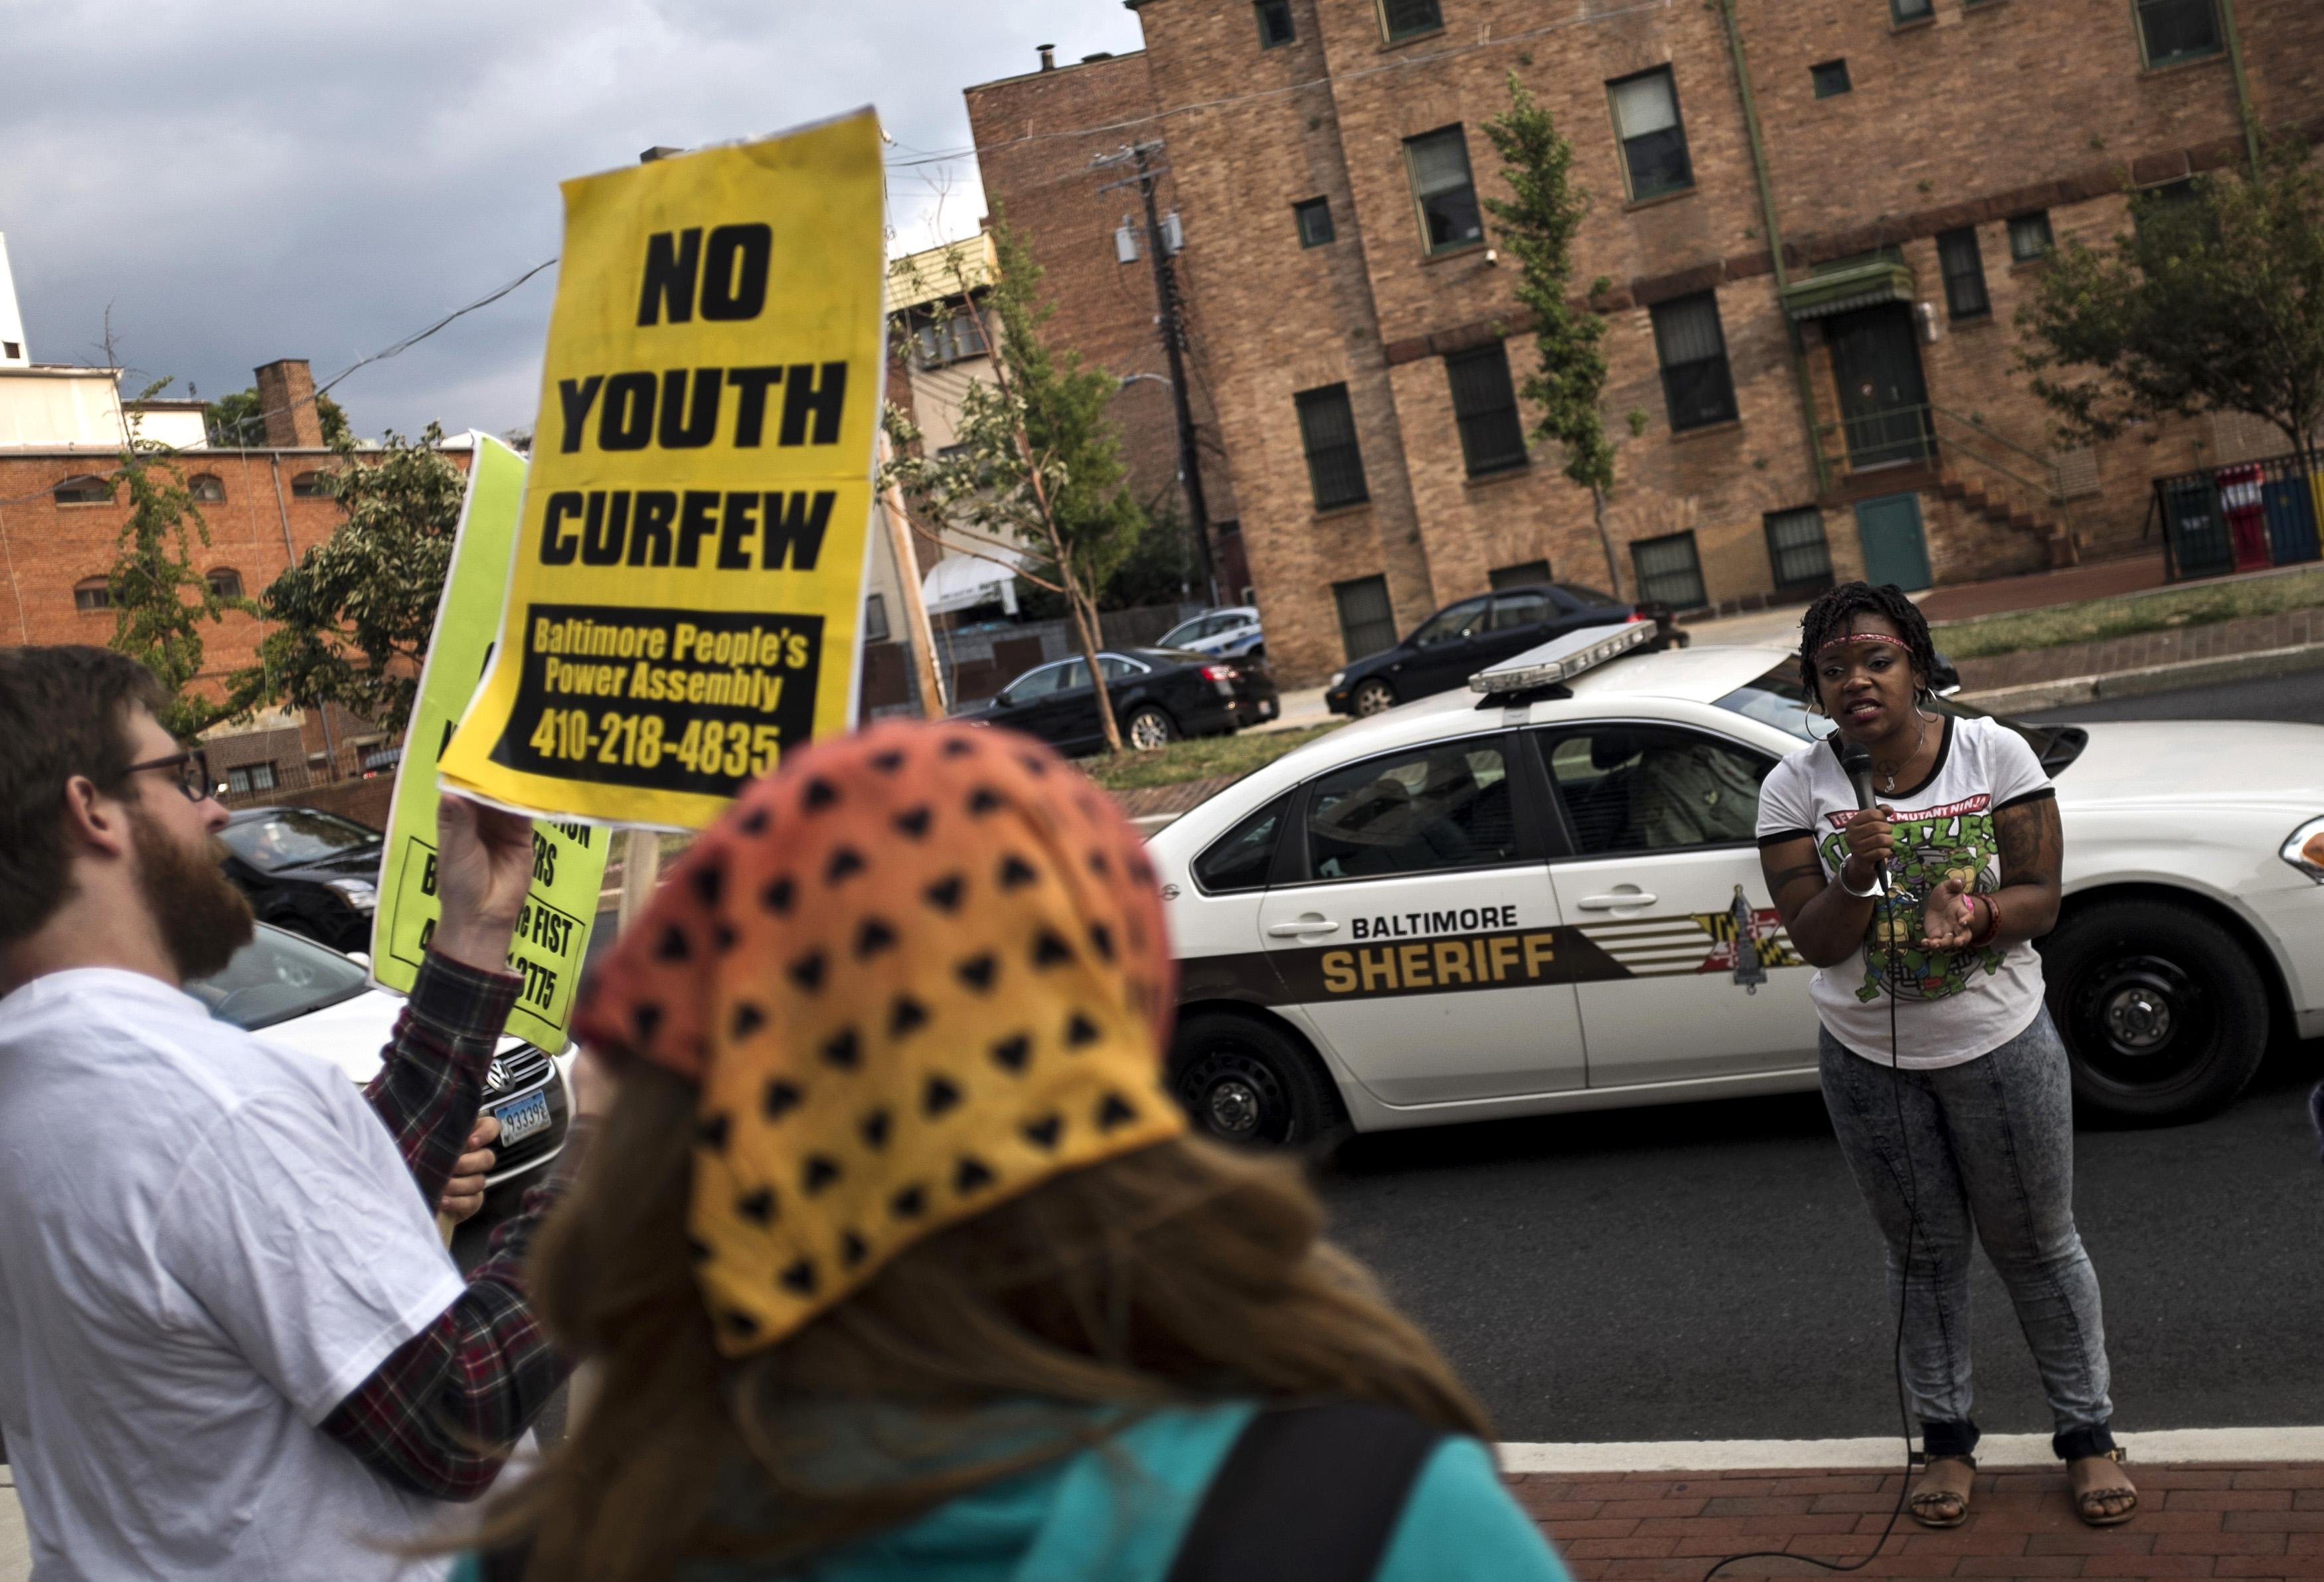 Protesters demonstrate before a community meeting with city officials about new youth curfew legislation going into effect on August 8 at the University of Baltimore Law Center in Baltimore, July 29, 2014. (James Lawler Duggan—Reuters)